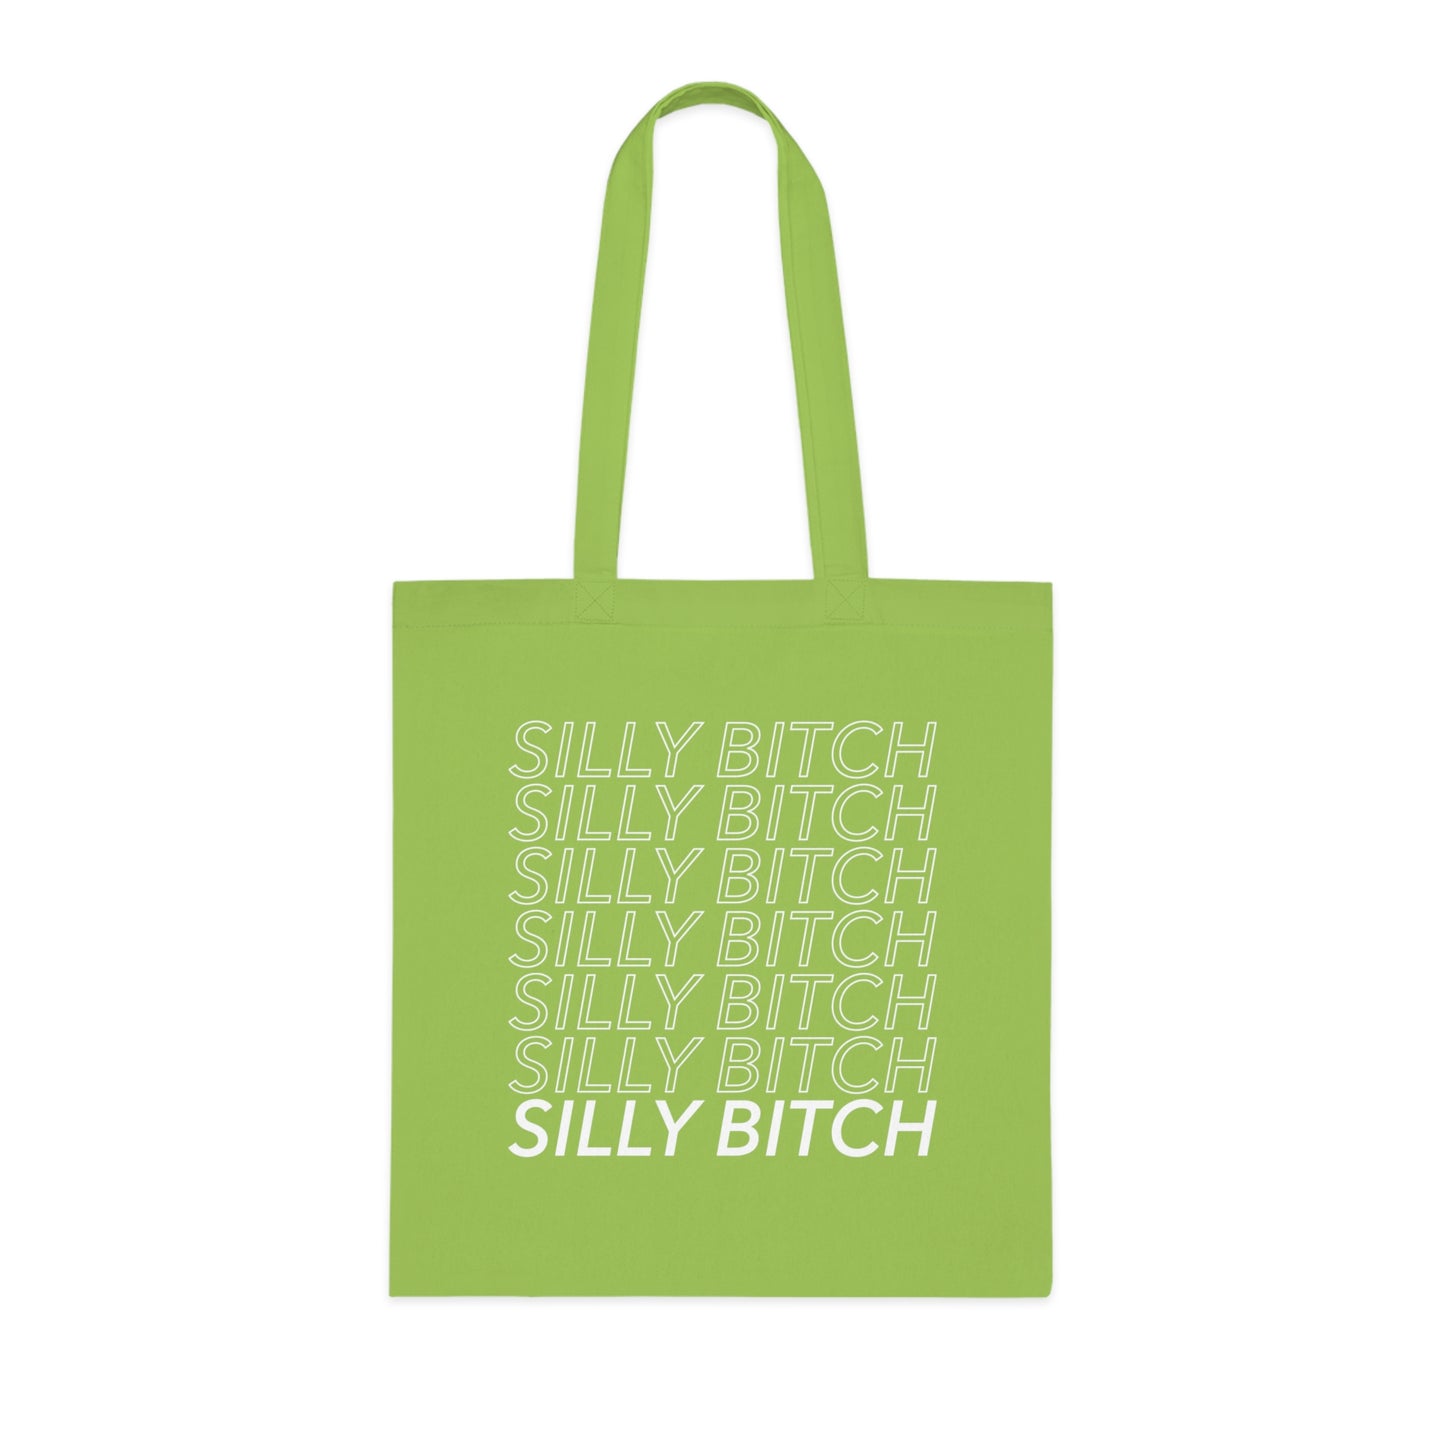 Silly Bitch Tote